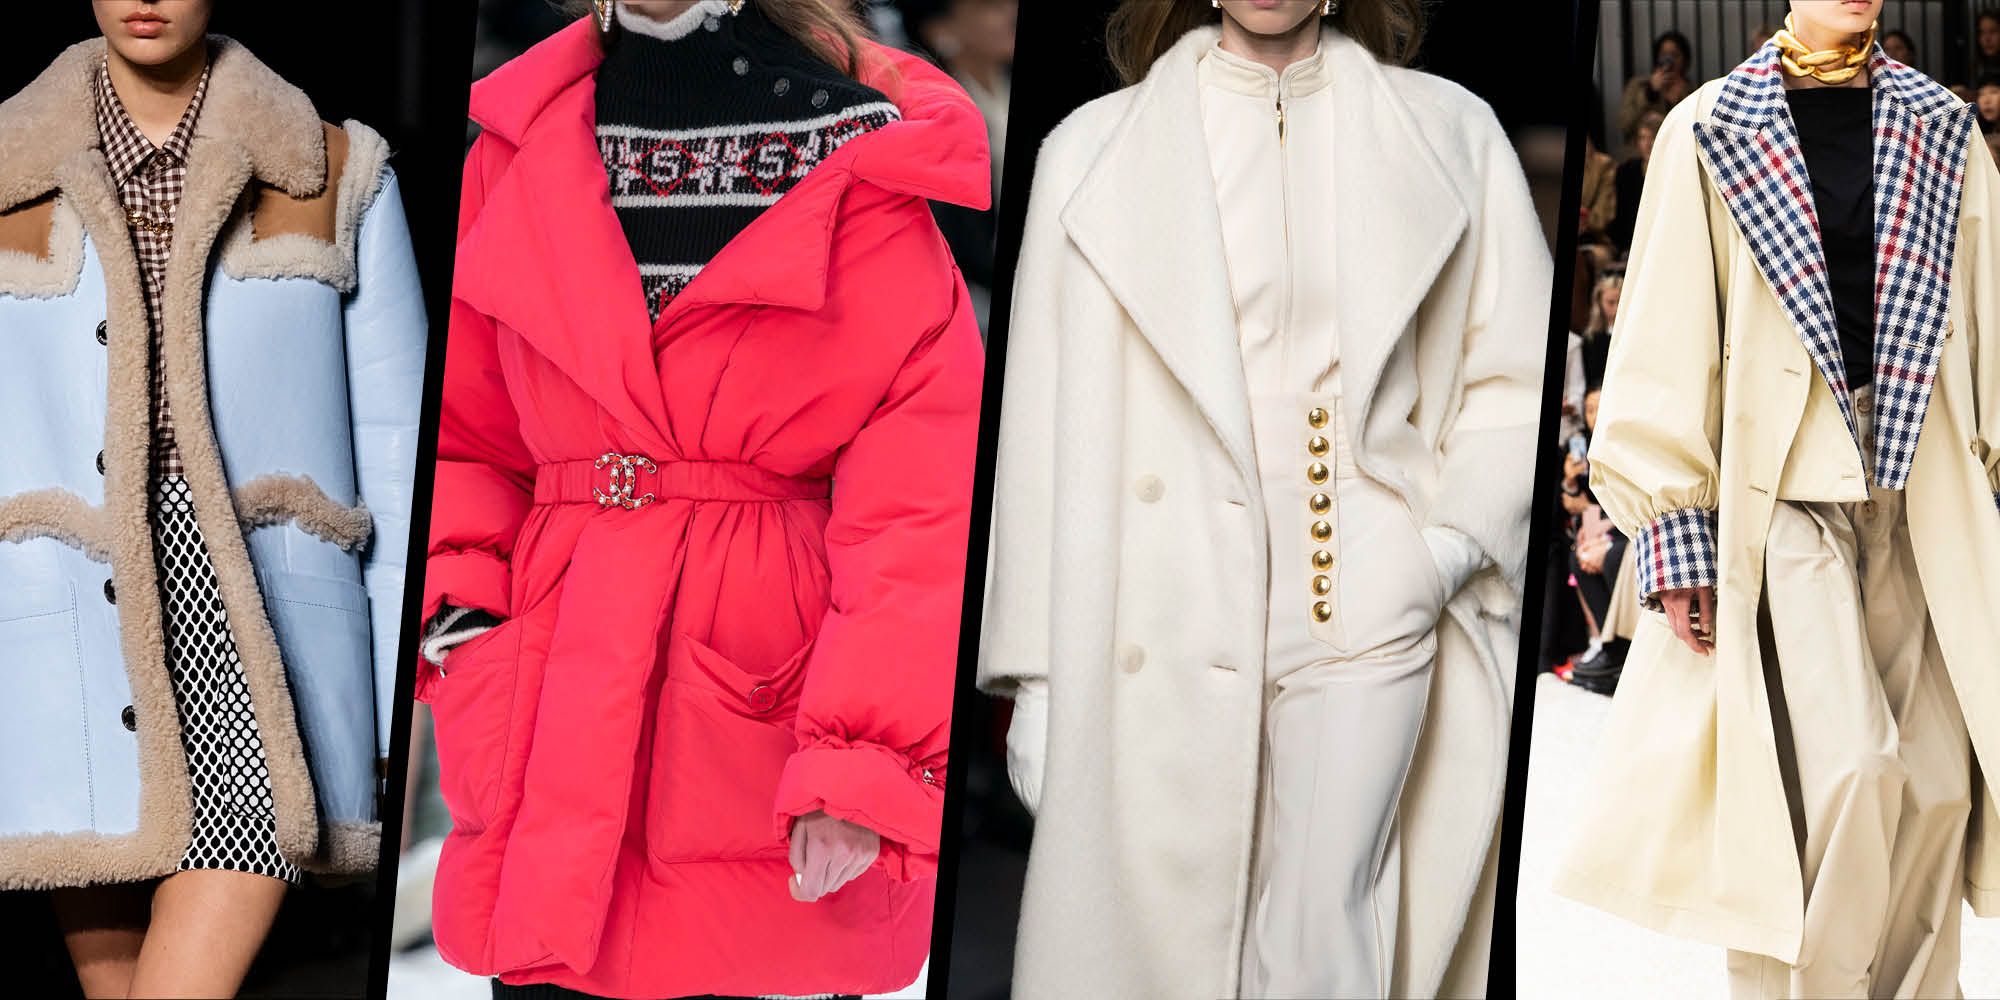 To block cancer Rafflesia Arnoldi 25 coats we want from the autumn/winter 2019 catwalk